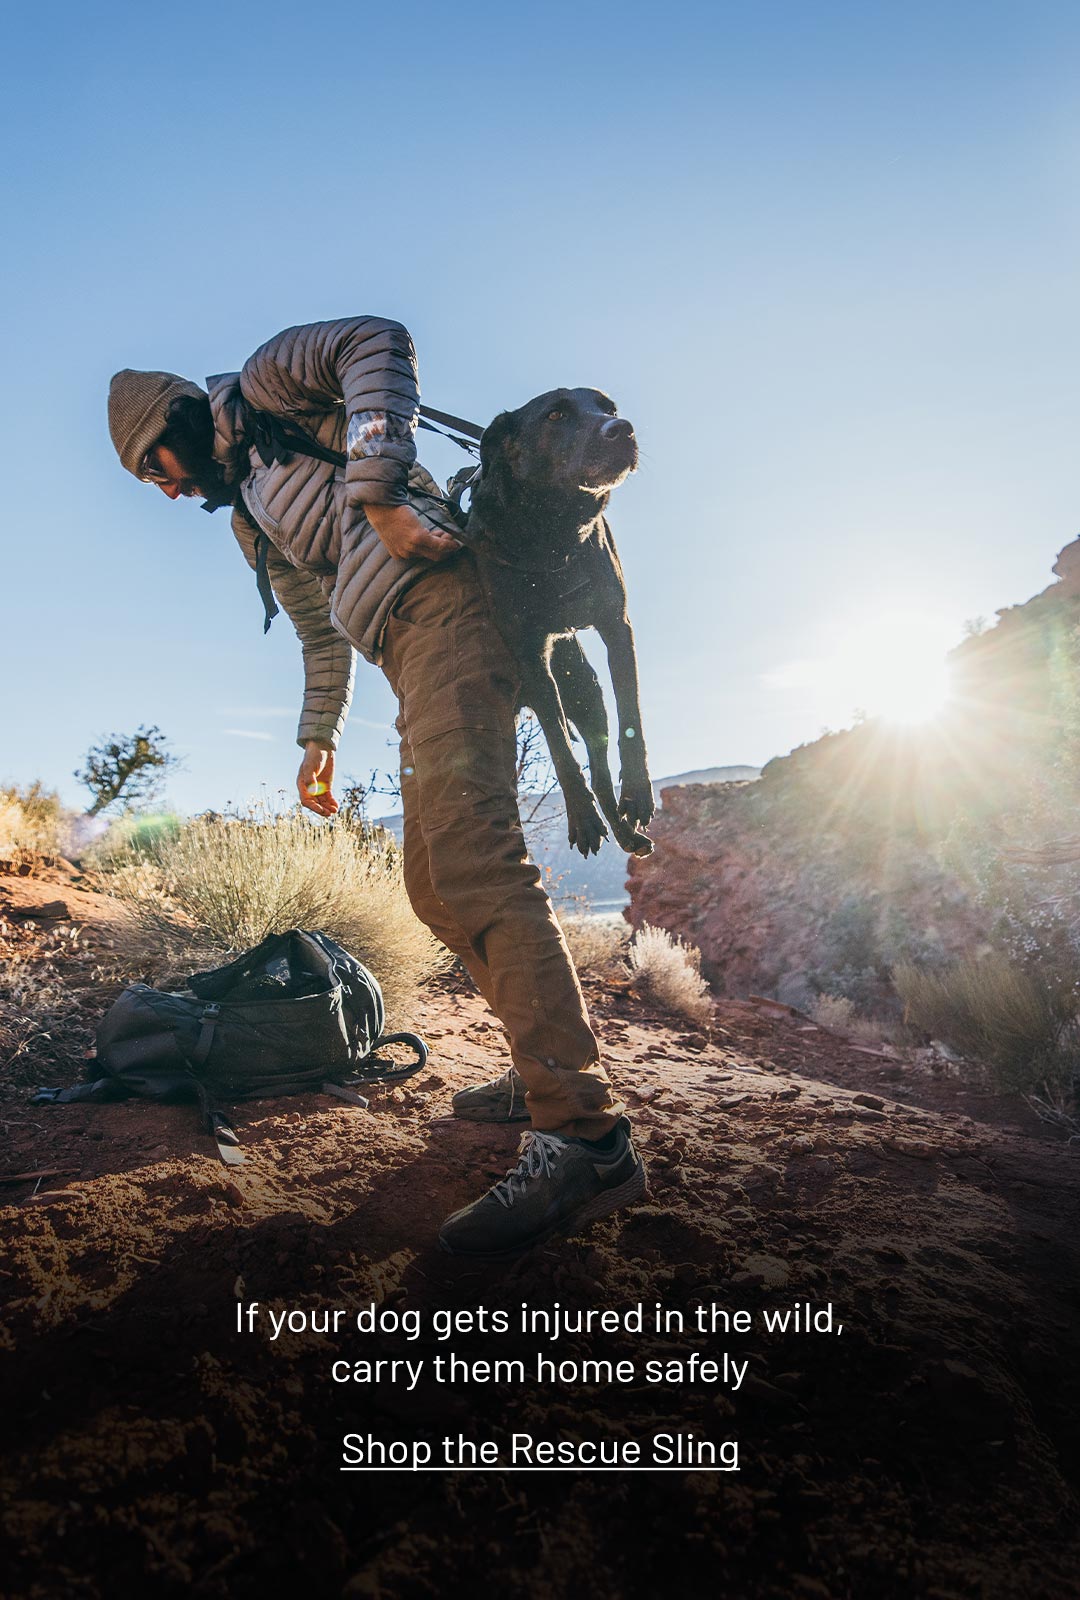 Man lifting his injured dog with the K-911 Rescue Sling in the desert